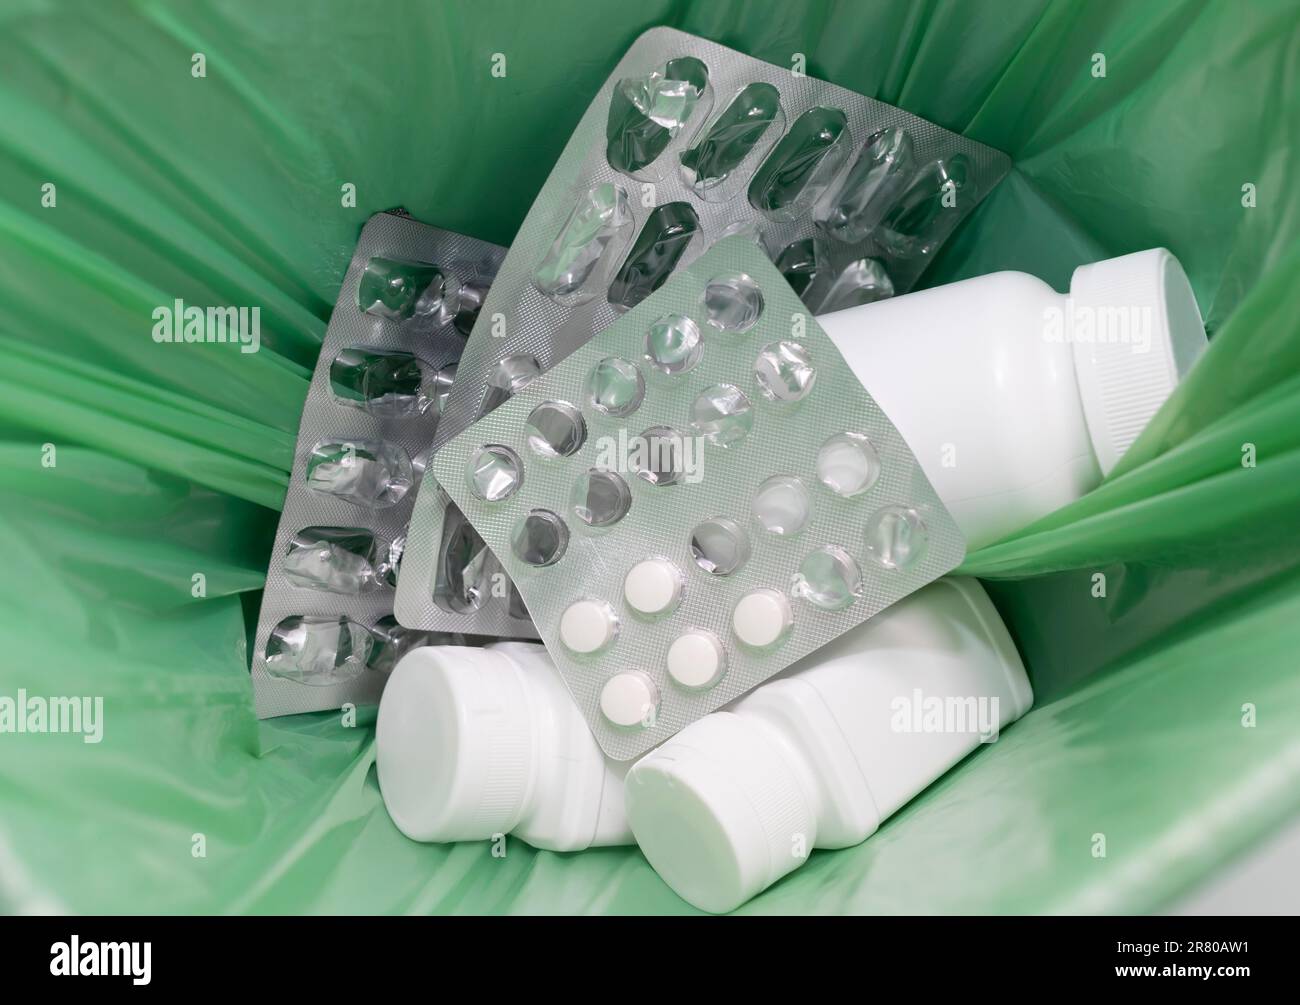 https://c8.alamy.com/comp/2R80AW1/closeup-garbage-can-trash-bin-full-of-medication-pills-tablet-bottles-empty-capsule-pastilles-medical-waste-supplement-over-consumption-concept-2R80AW1.jpg